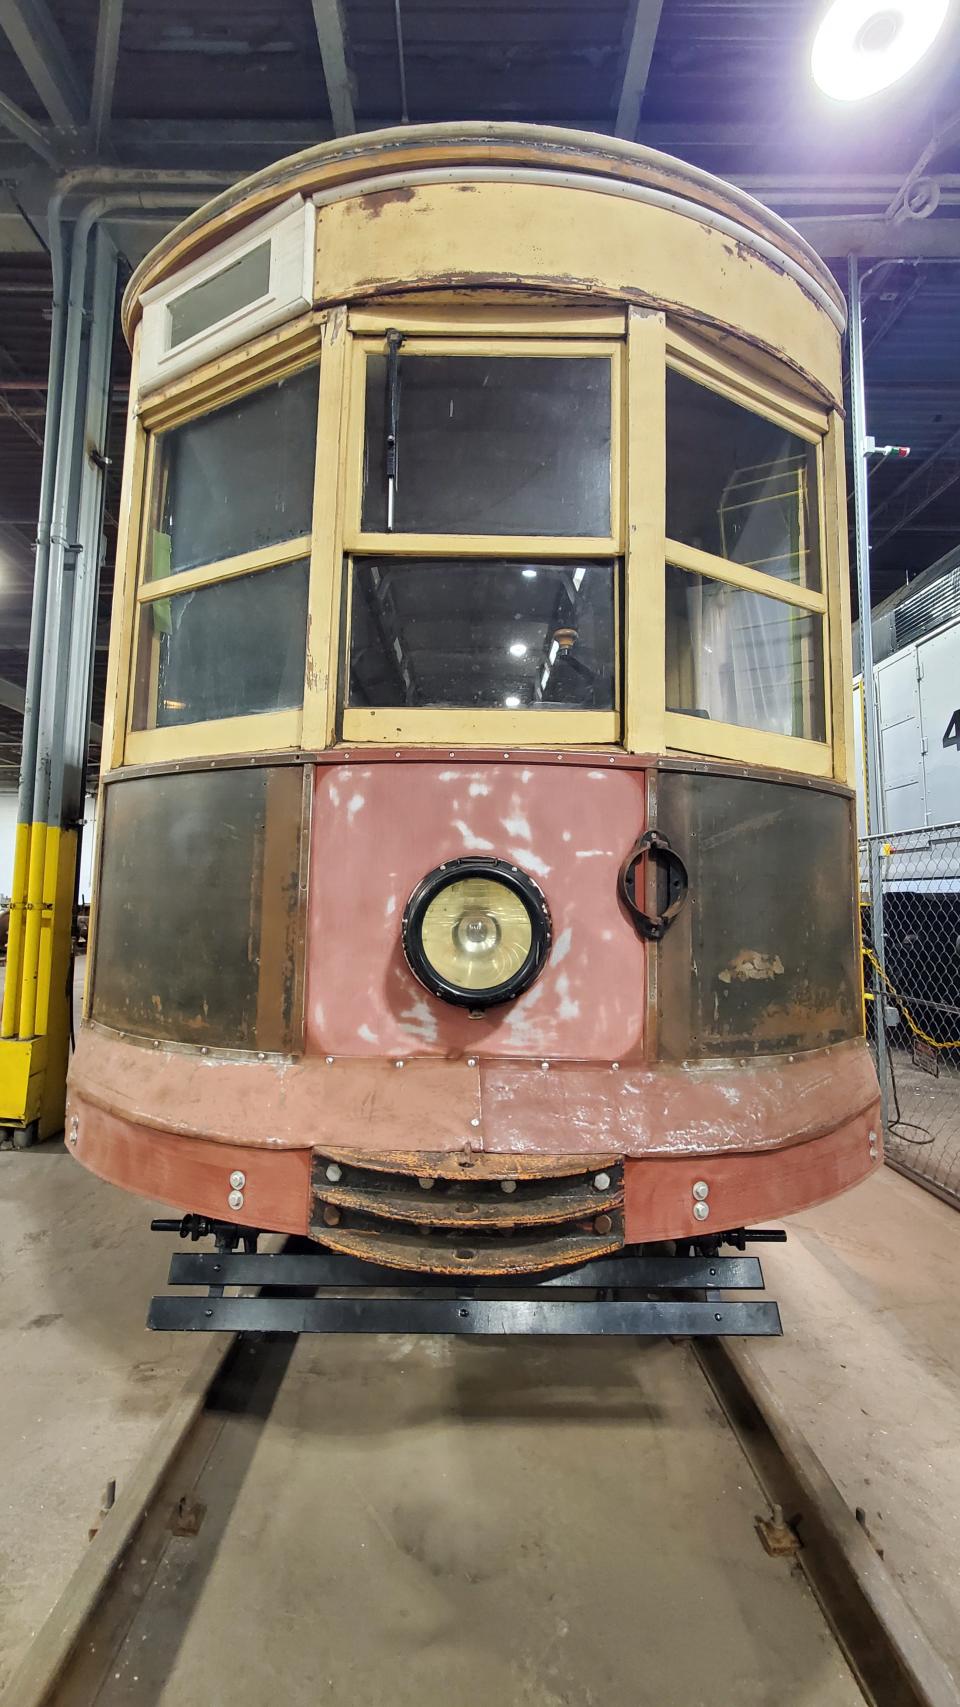 Public Service's trolley car, No. 2651, was in a sad state of repair when it came into the hands of the Liberty Historic Railway, Inc. nonprofit in 2001. Over two decades, it has slowly received a roughly $450,000 makeover in preparation for a next chapter.